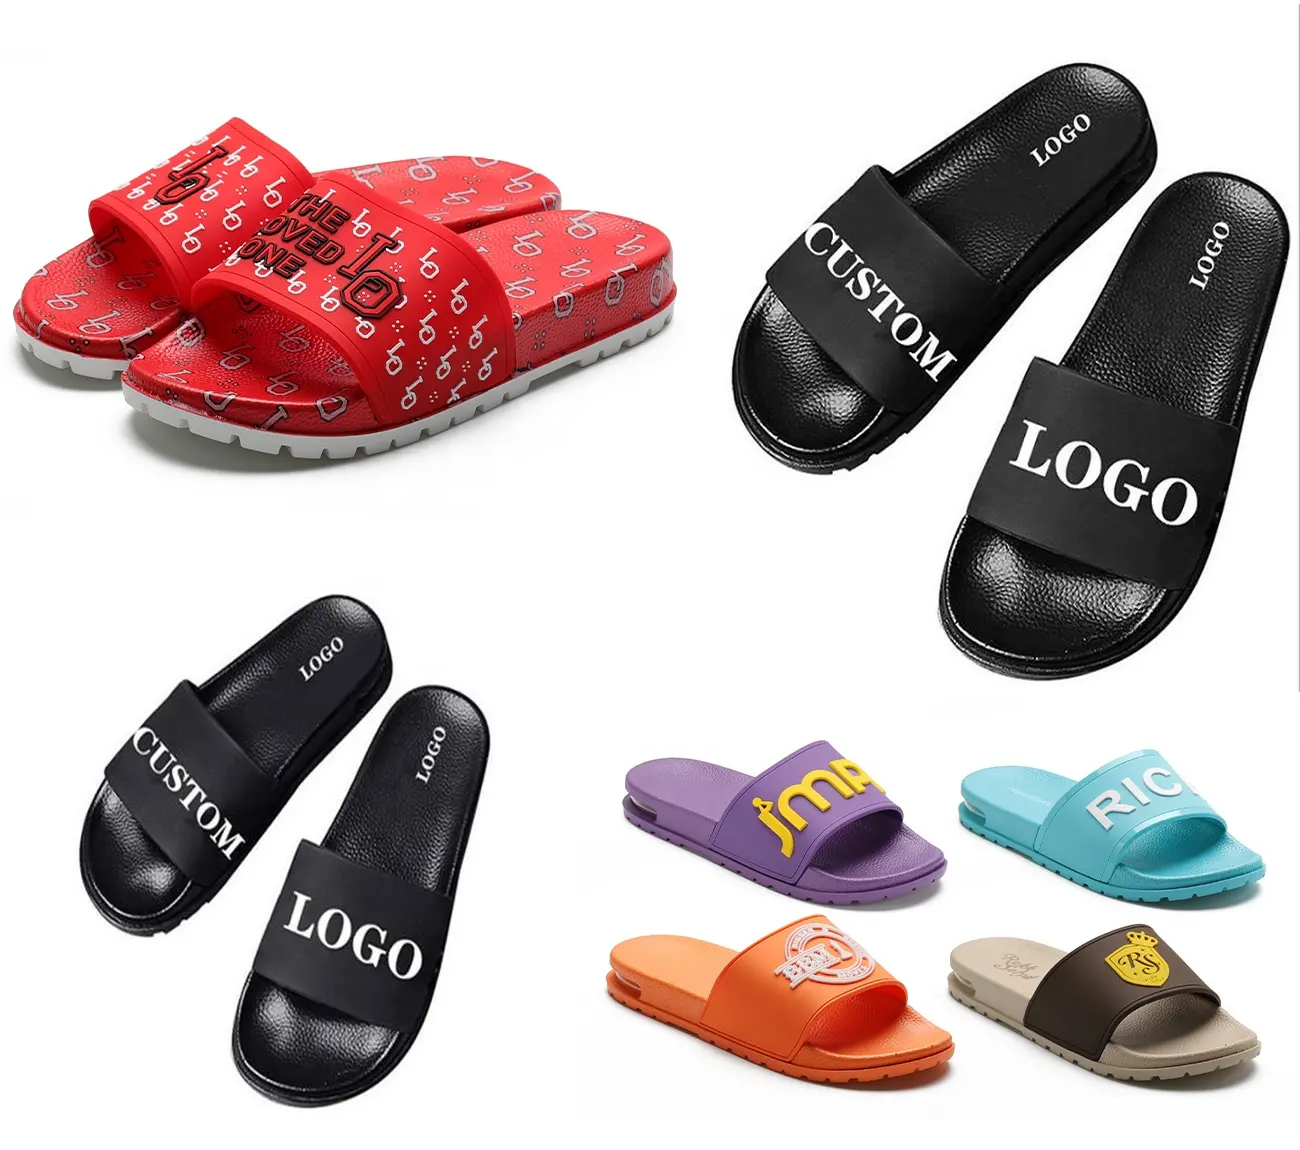 Henghao Good Price Big Size Thick Sole Flat Customized Slide Sandals Shoes Outdoor Comfortable Sandals And Slippers For Men